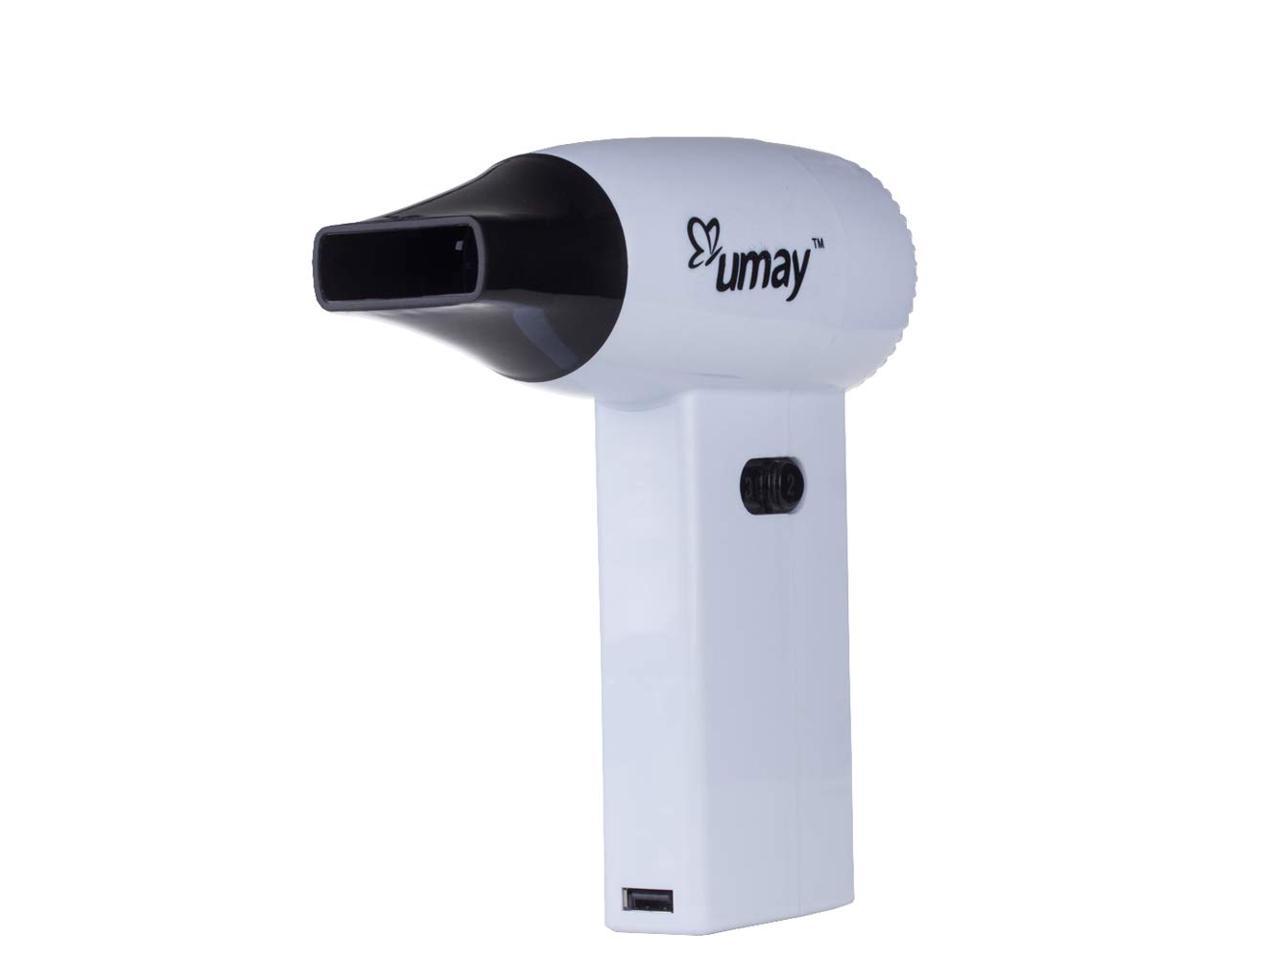 Cordless Hair Dryer 450W USB Rechargeable Portable Blow Hot and Cold Blower  Suitable for Hotel Home School pet Care Outdoor Travel Tool Equipment,EnhancedEdition  